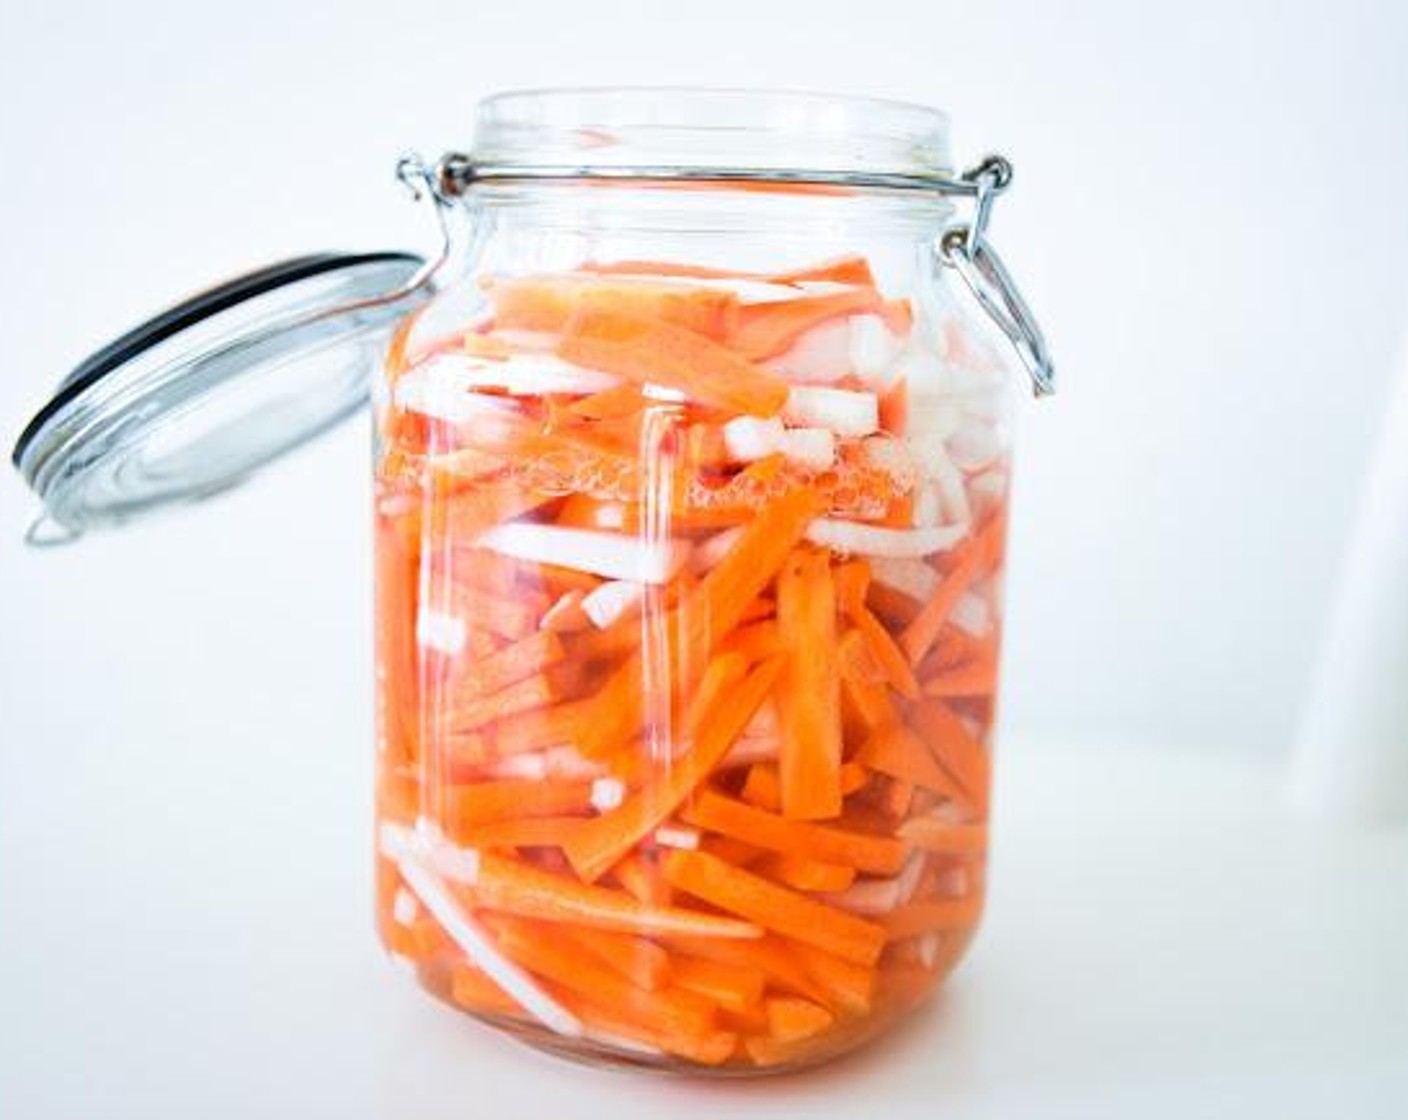 step 4 Add vegetables to the glass jar, including any juices, and push down as much as you can. Ensure there is at least a 2-inch gap from the top to avoid leakage and spillage.